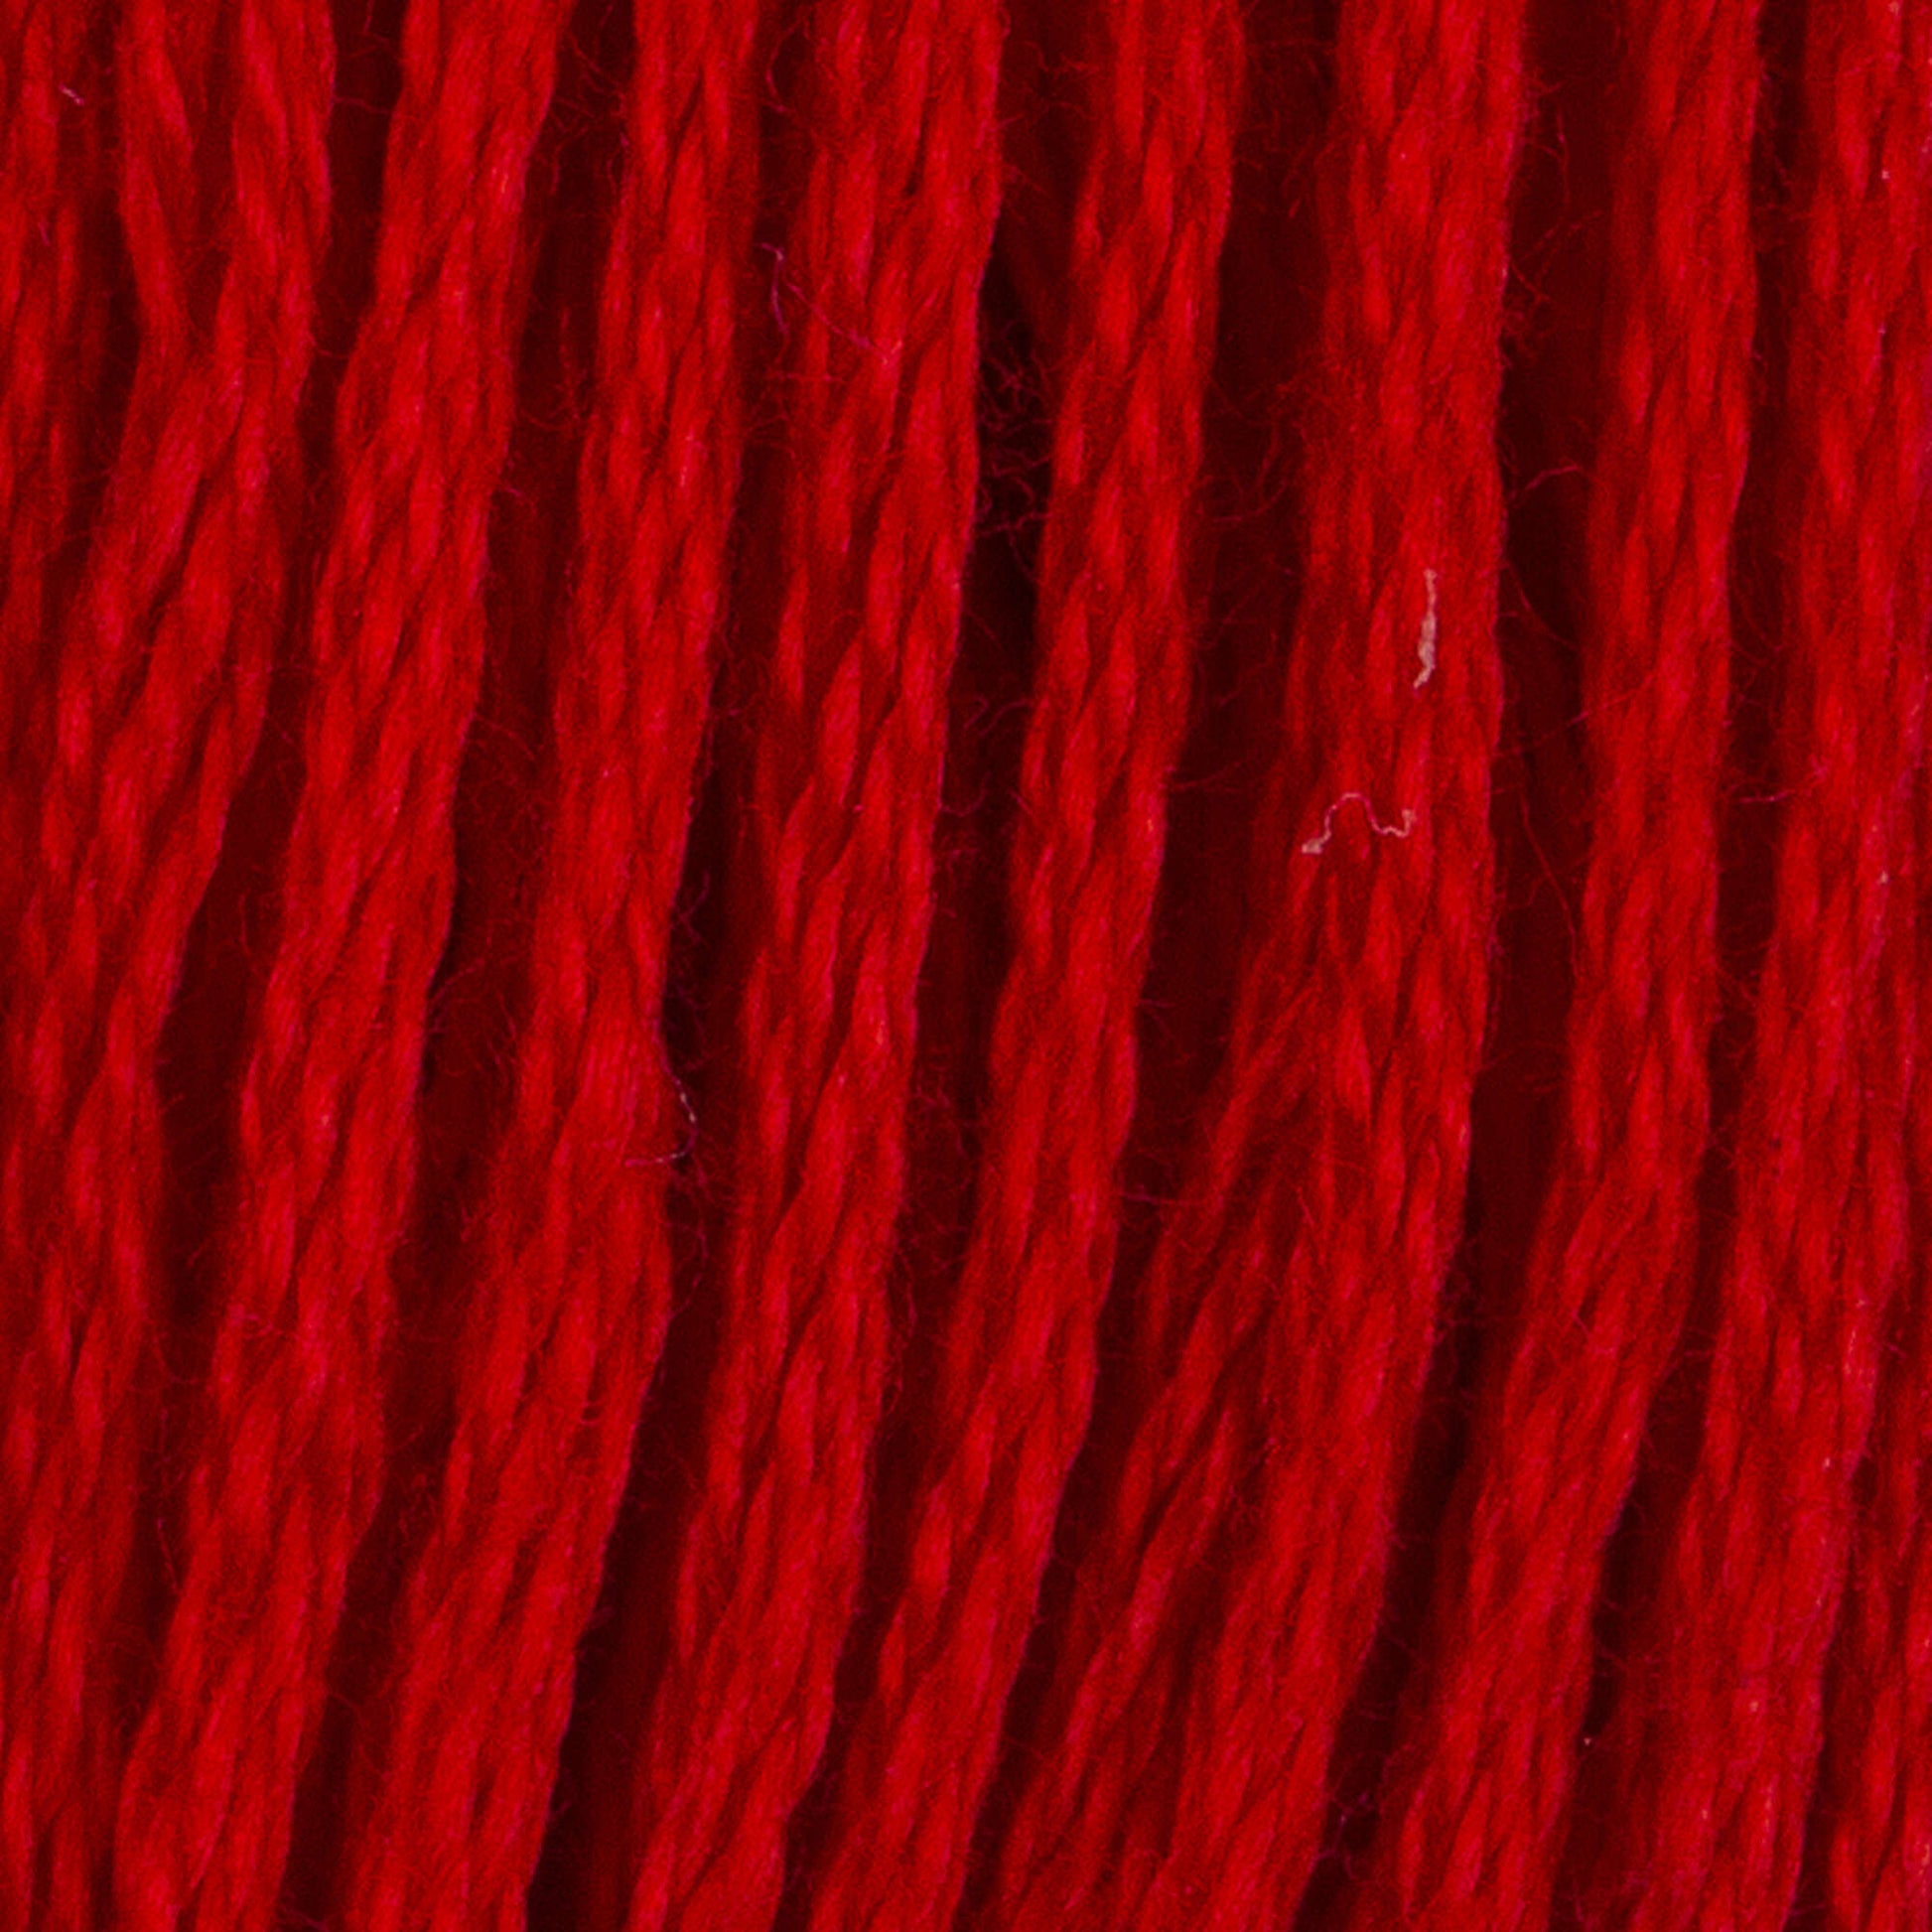 Coats & Clark Cotton Embroidery Floss Christmas Red Bright